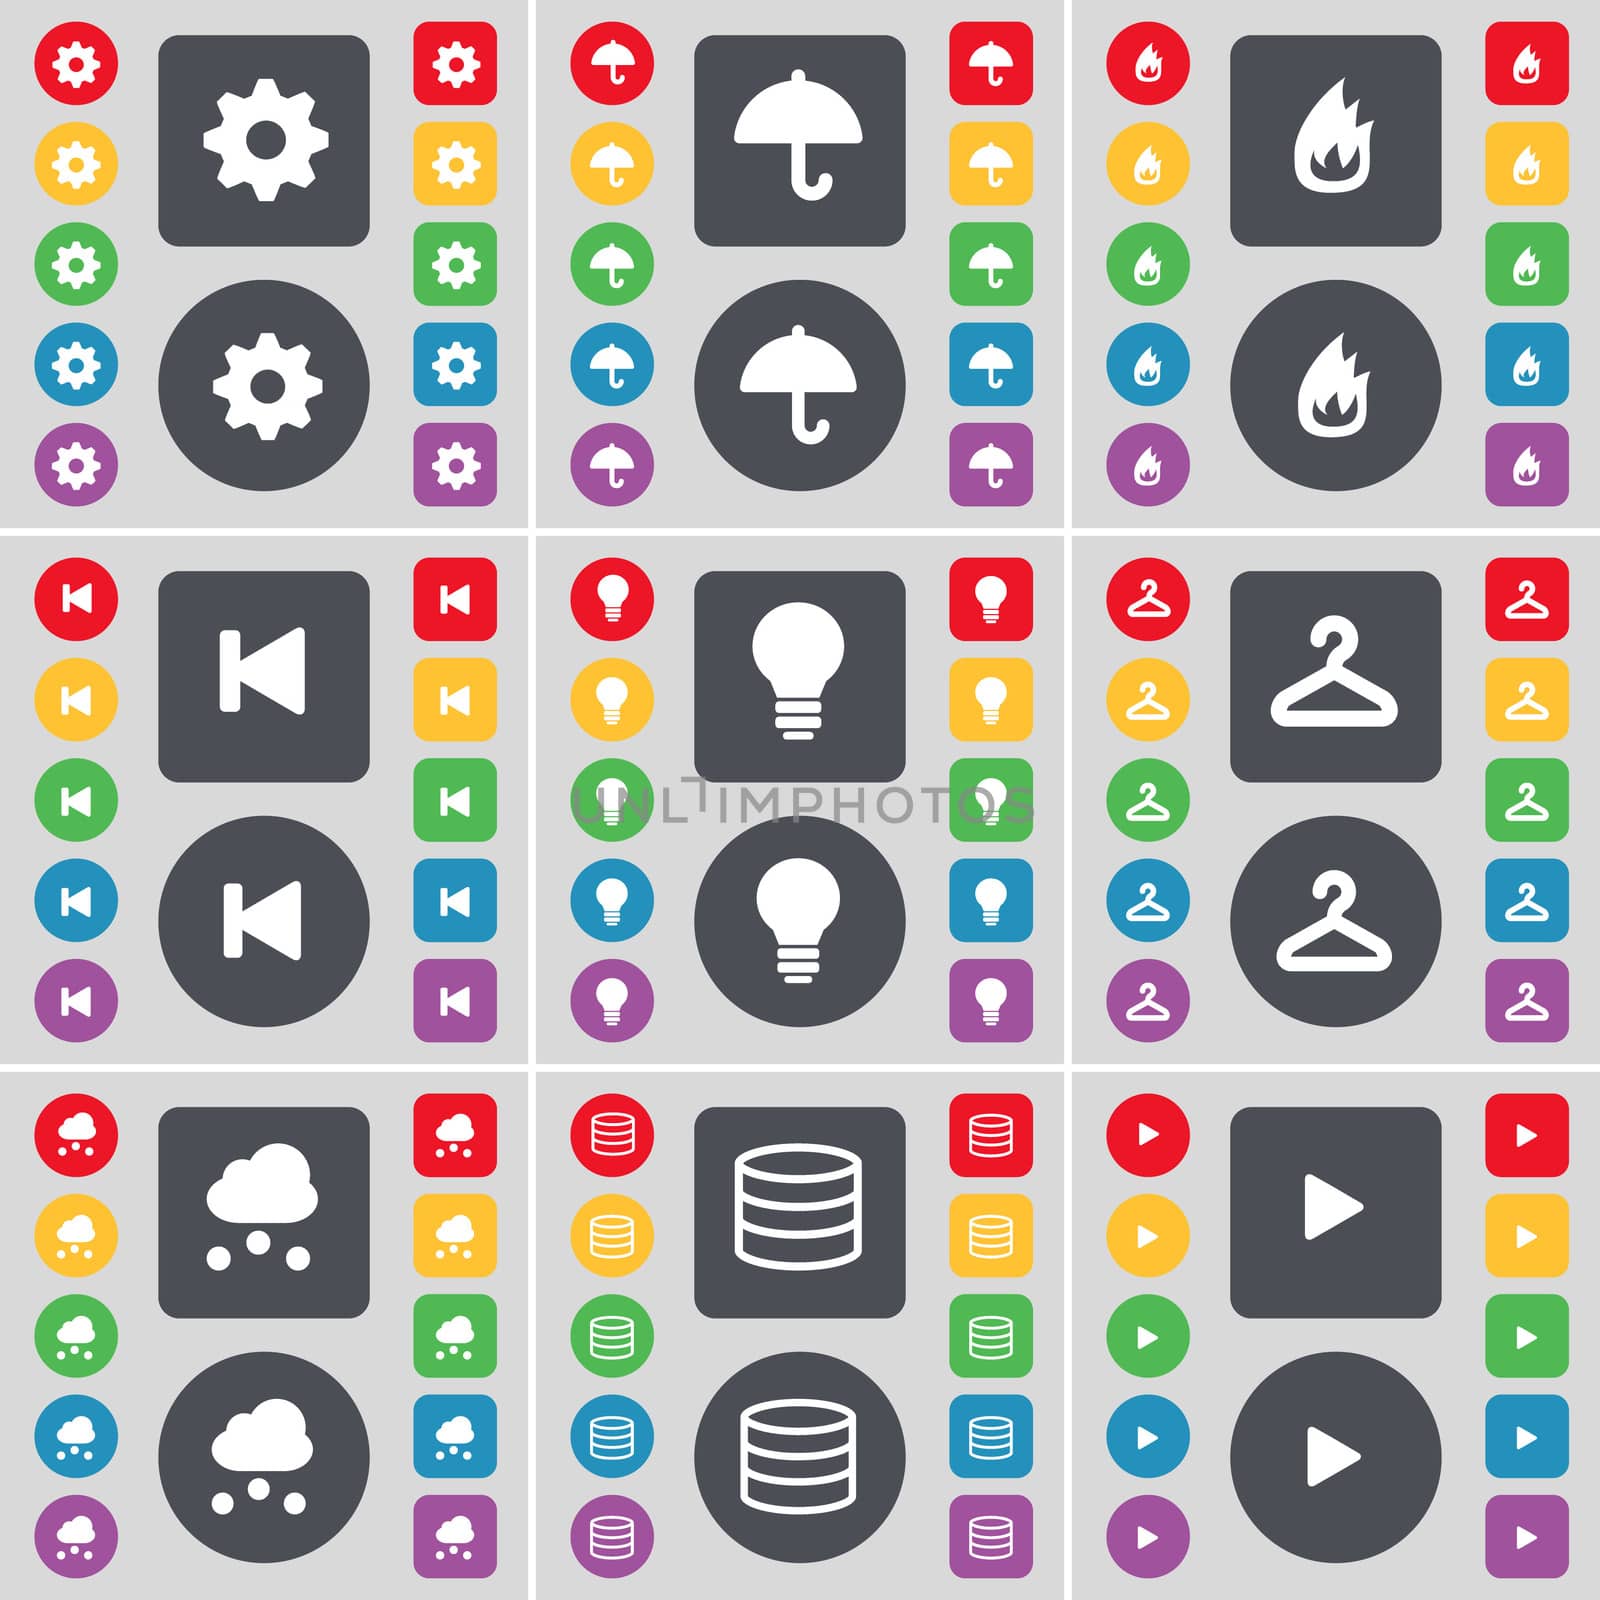 Gear, Umbrella, Fire, Media skip, Light bulb, Hanger, Cloud, Database, Media play icon symbol. A large set of flat, colored buttons for your design.  by serhii_lohvyniuk